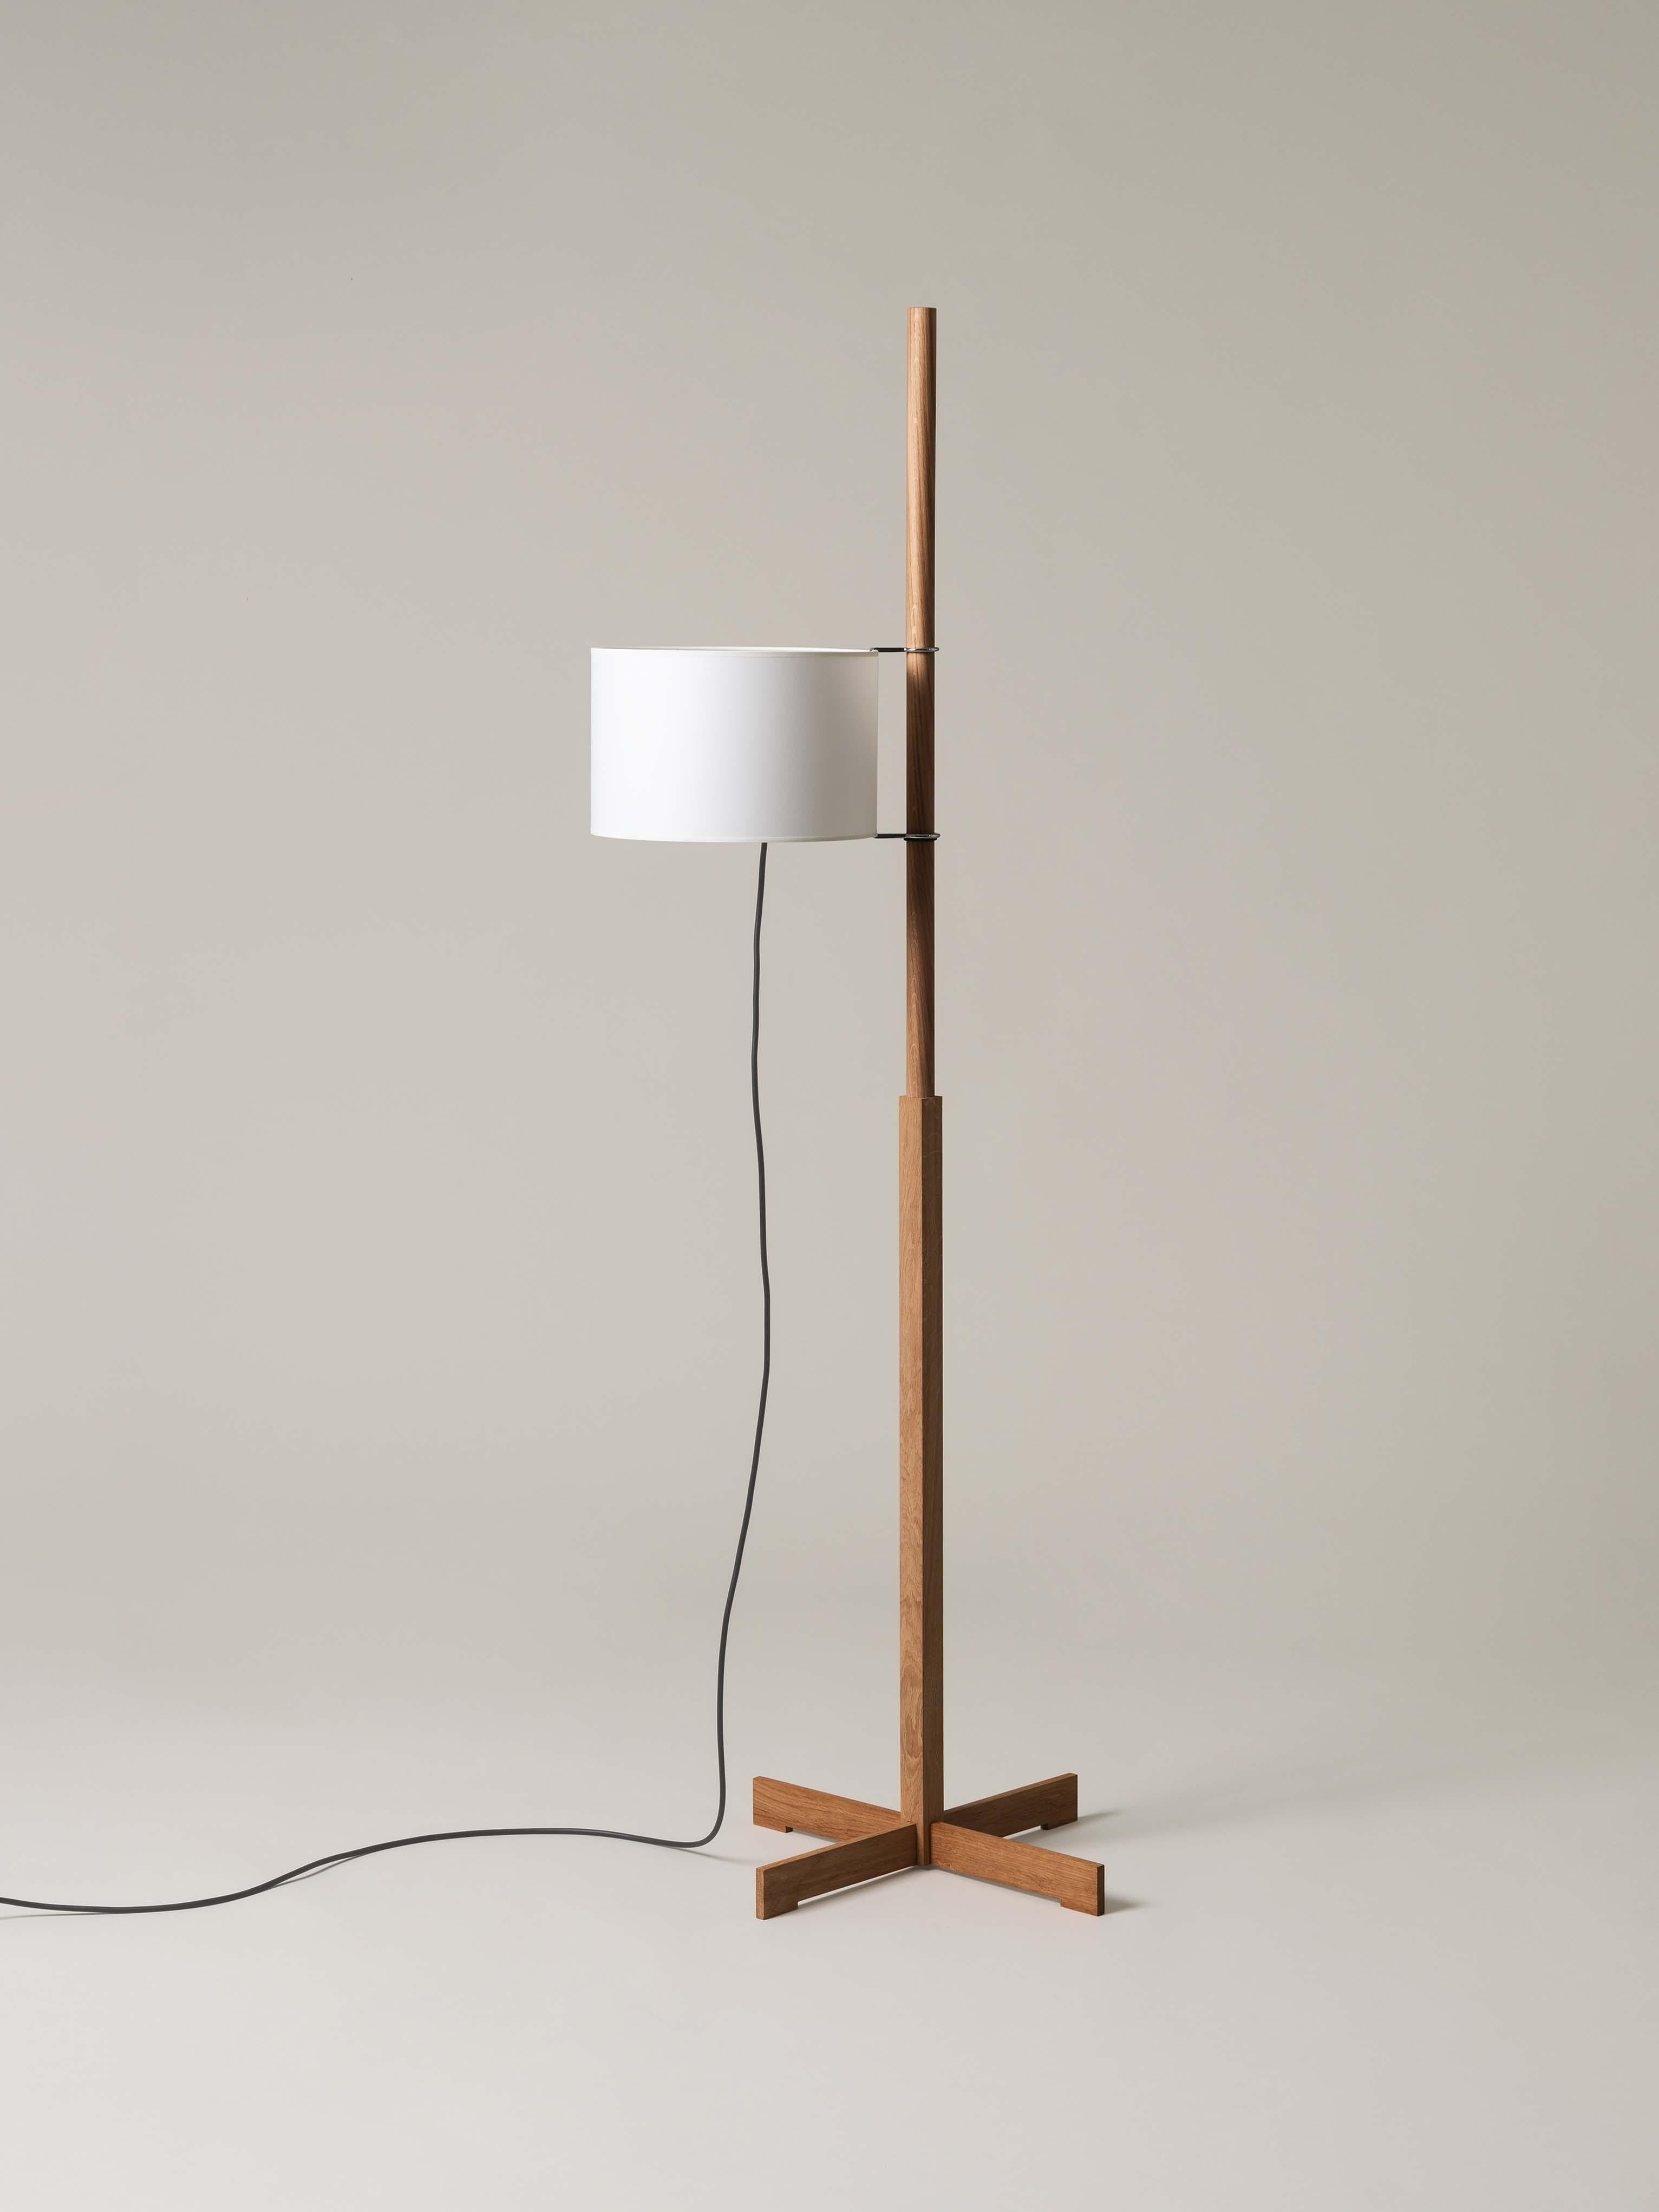 White and oak TMM floor lamp by Miguel Milá
Dimensions: D 50 x W 60 x H 166 cm
Materials: Cherry wood, parchment lampshade.
Available in 3 lampshades: beige, white and white with diffuser.
Available in 5 woods: beech, cherry, walnut, natural oak